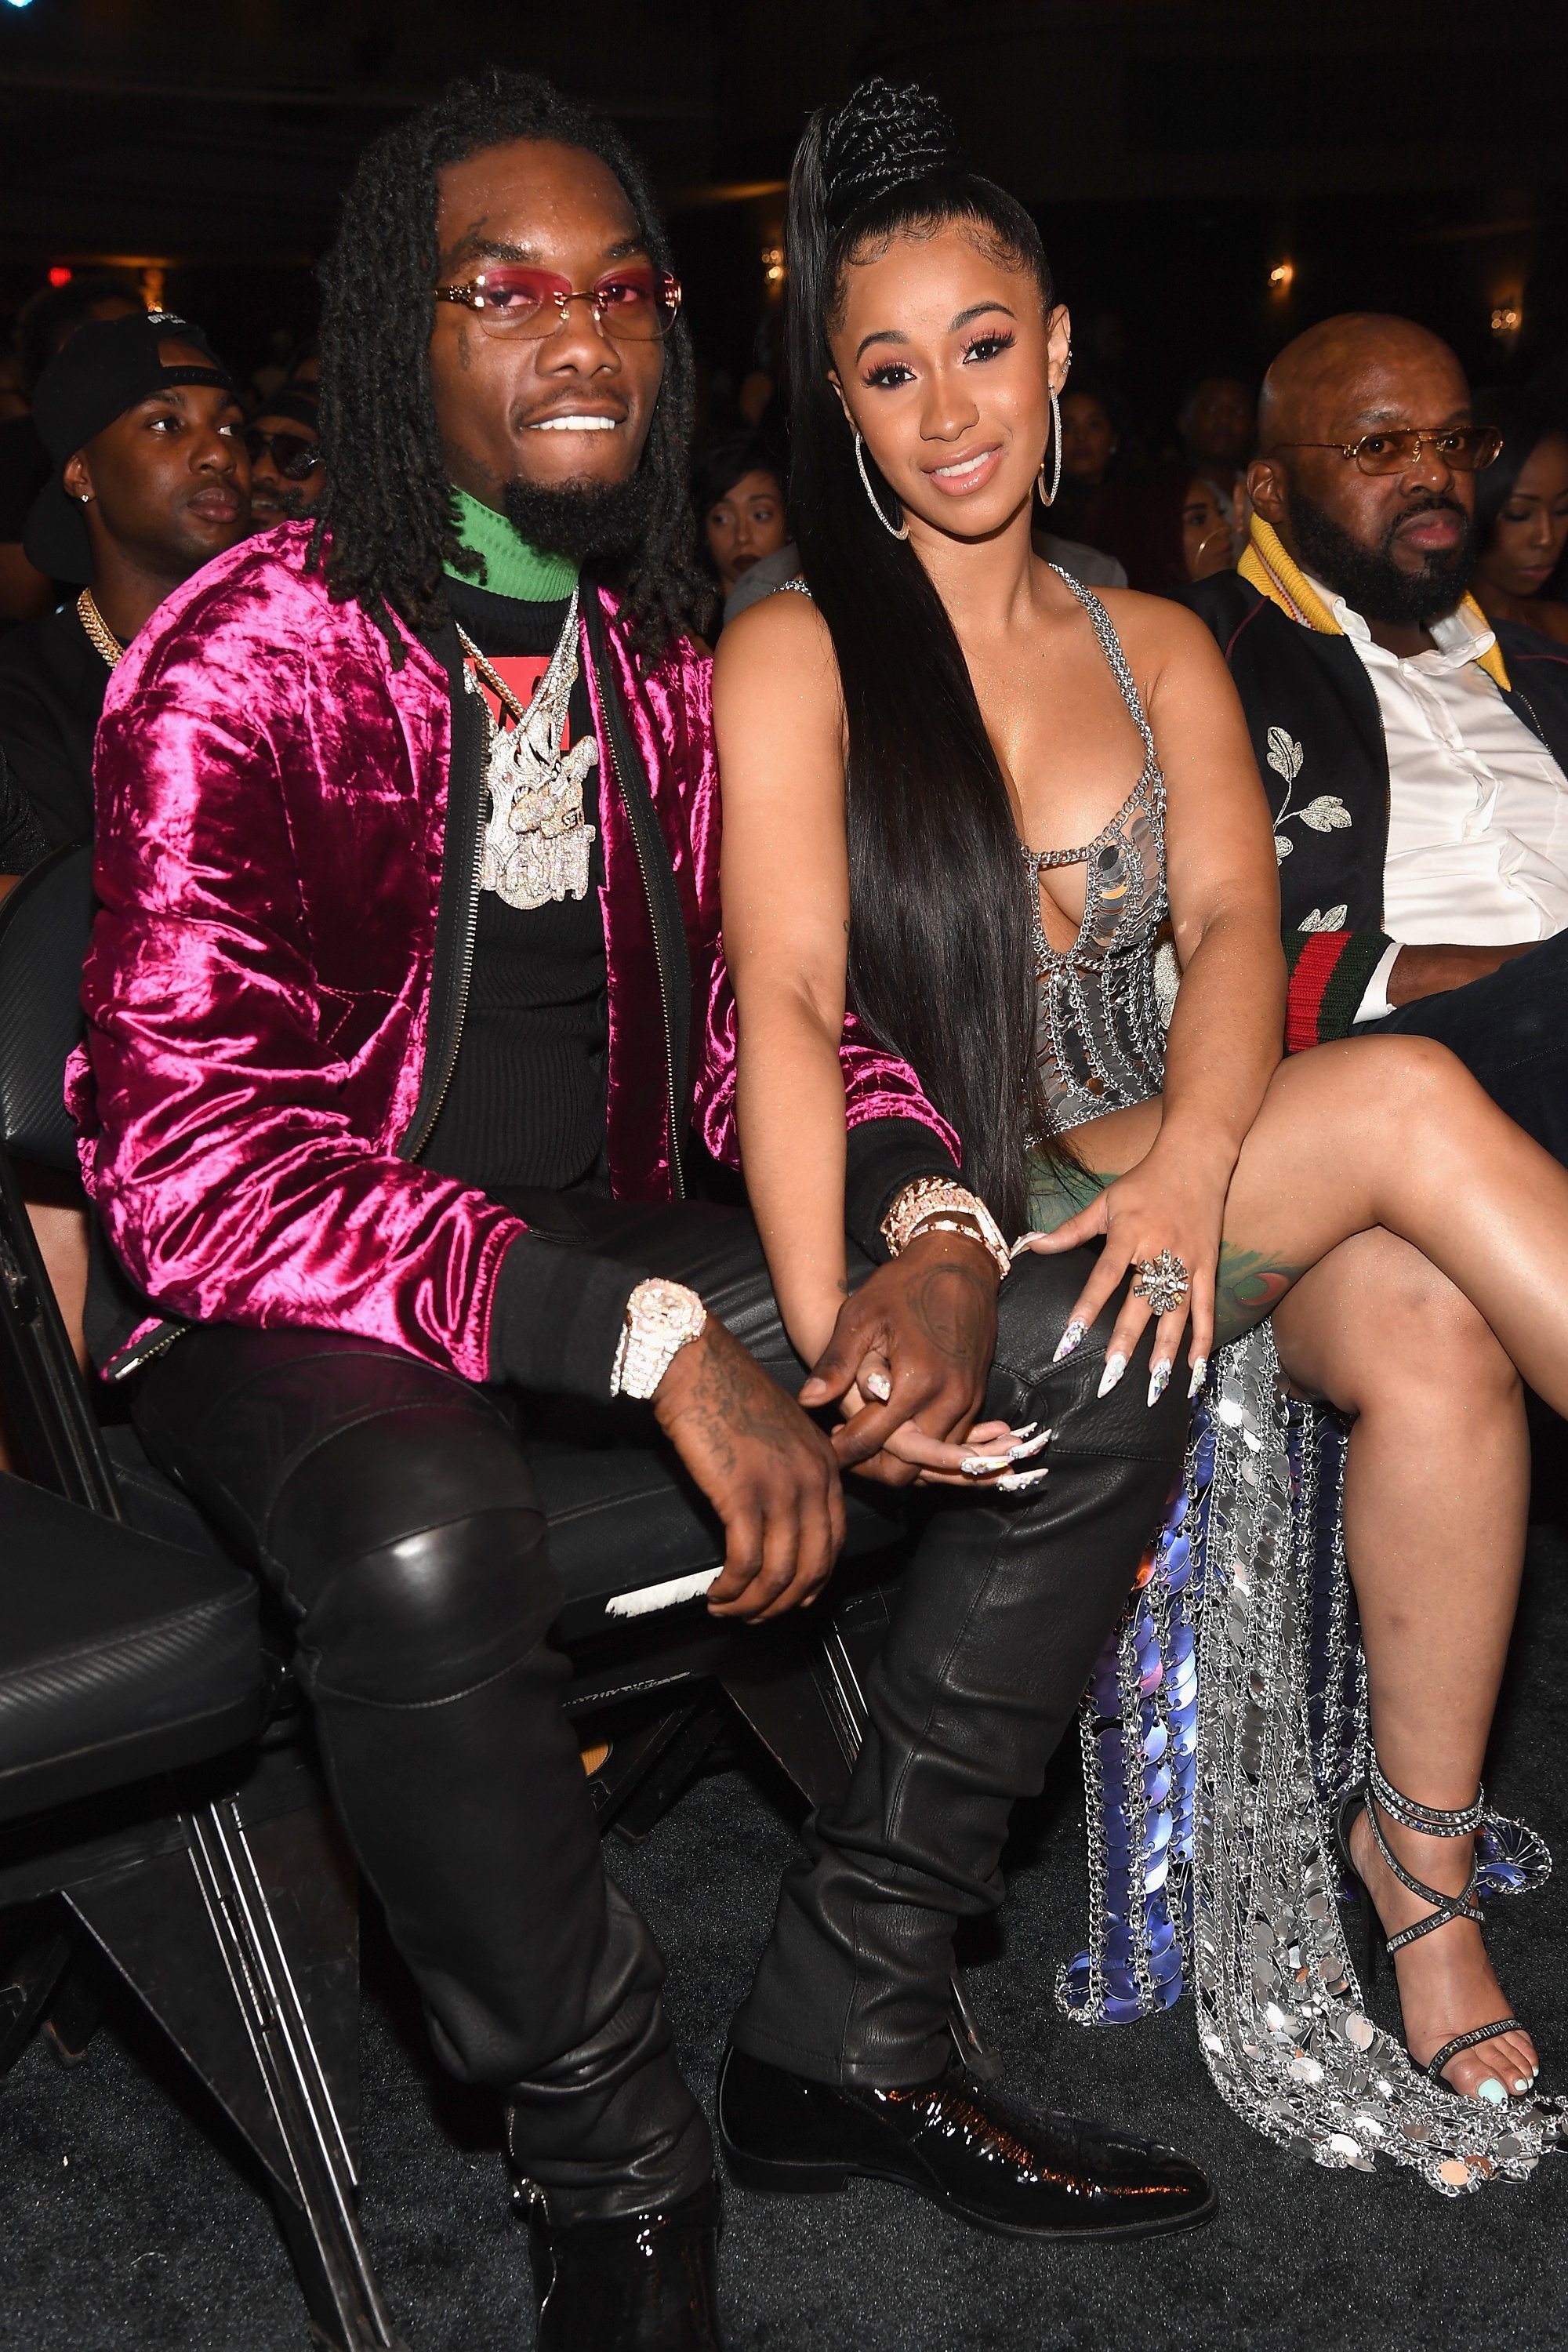 Offset & Cardi B at the BET Hip Hop Awards on Oct. 6, 2017 in Florida | Photo: Getty Images